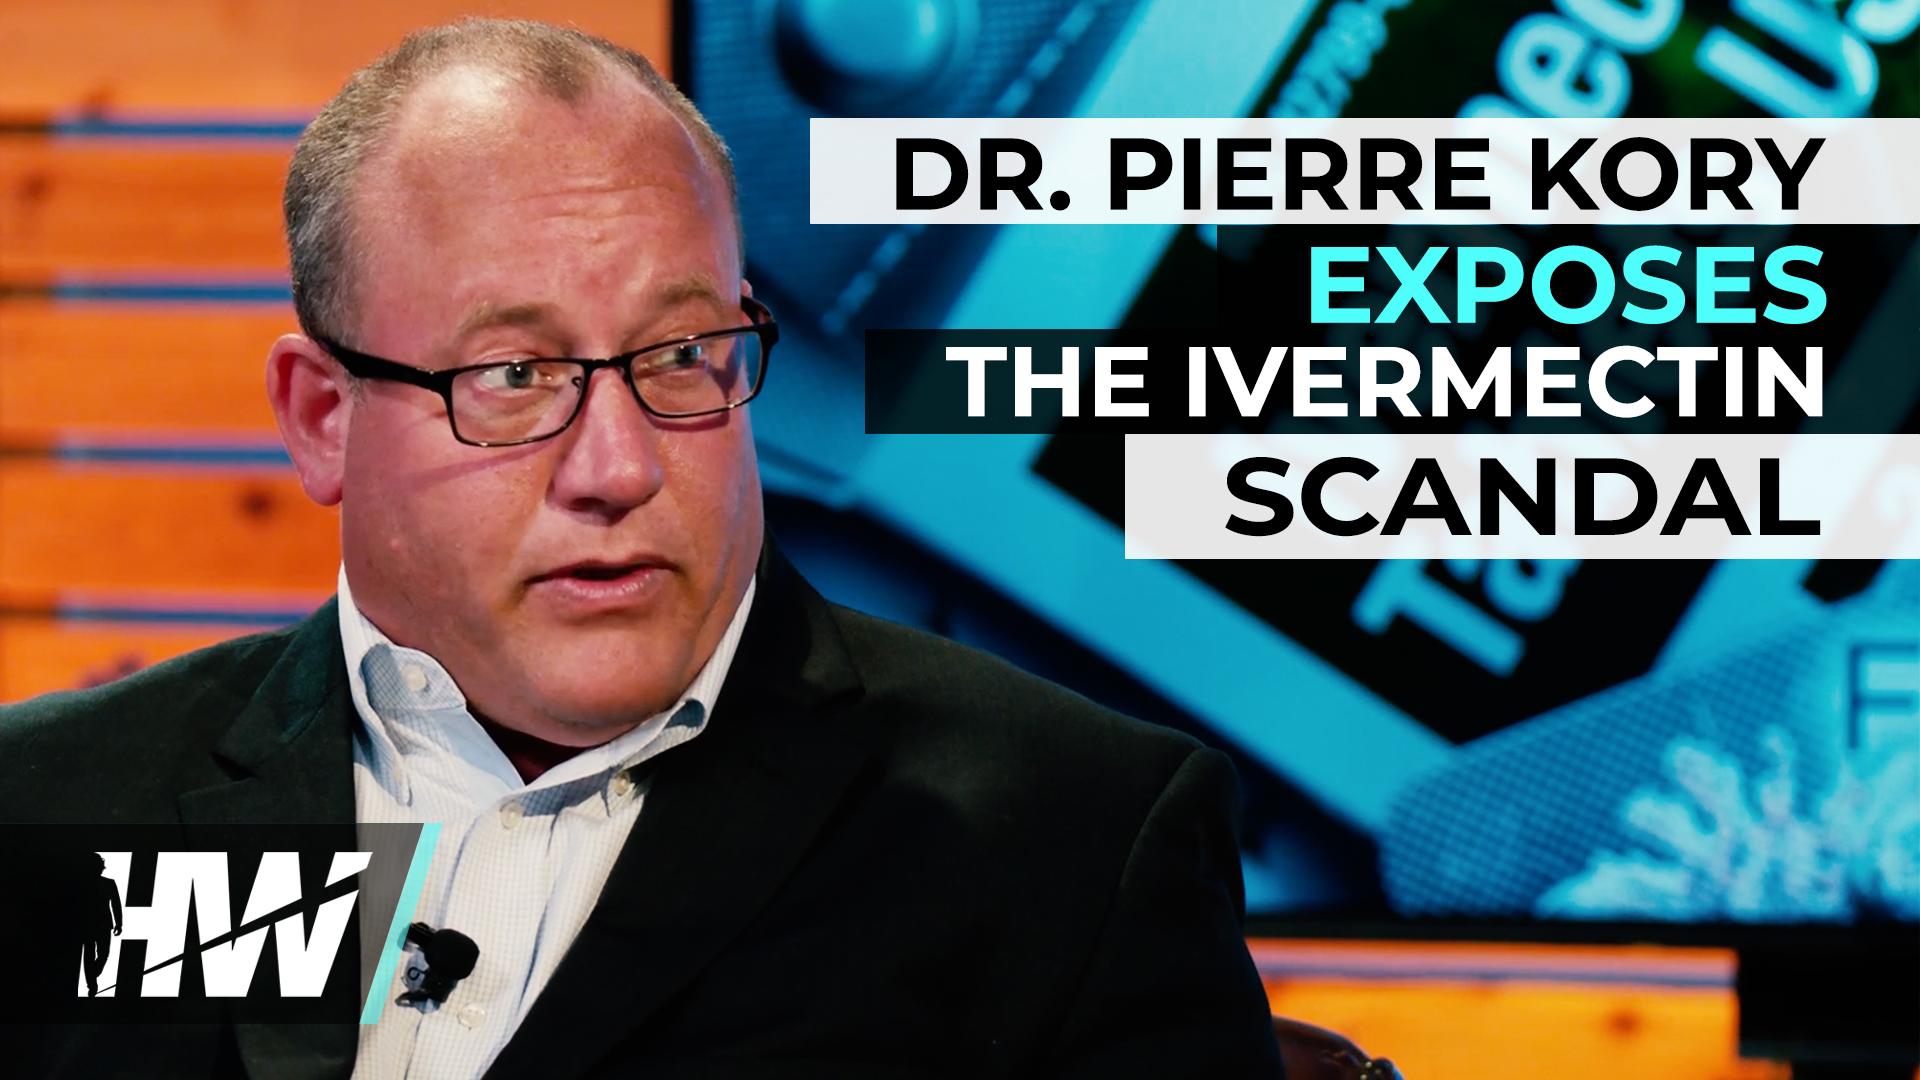 DR PIERRE KORY EXPOSES THE IVERMECTIN SCANDAL